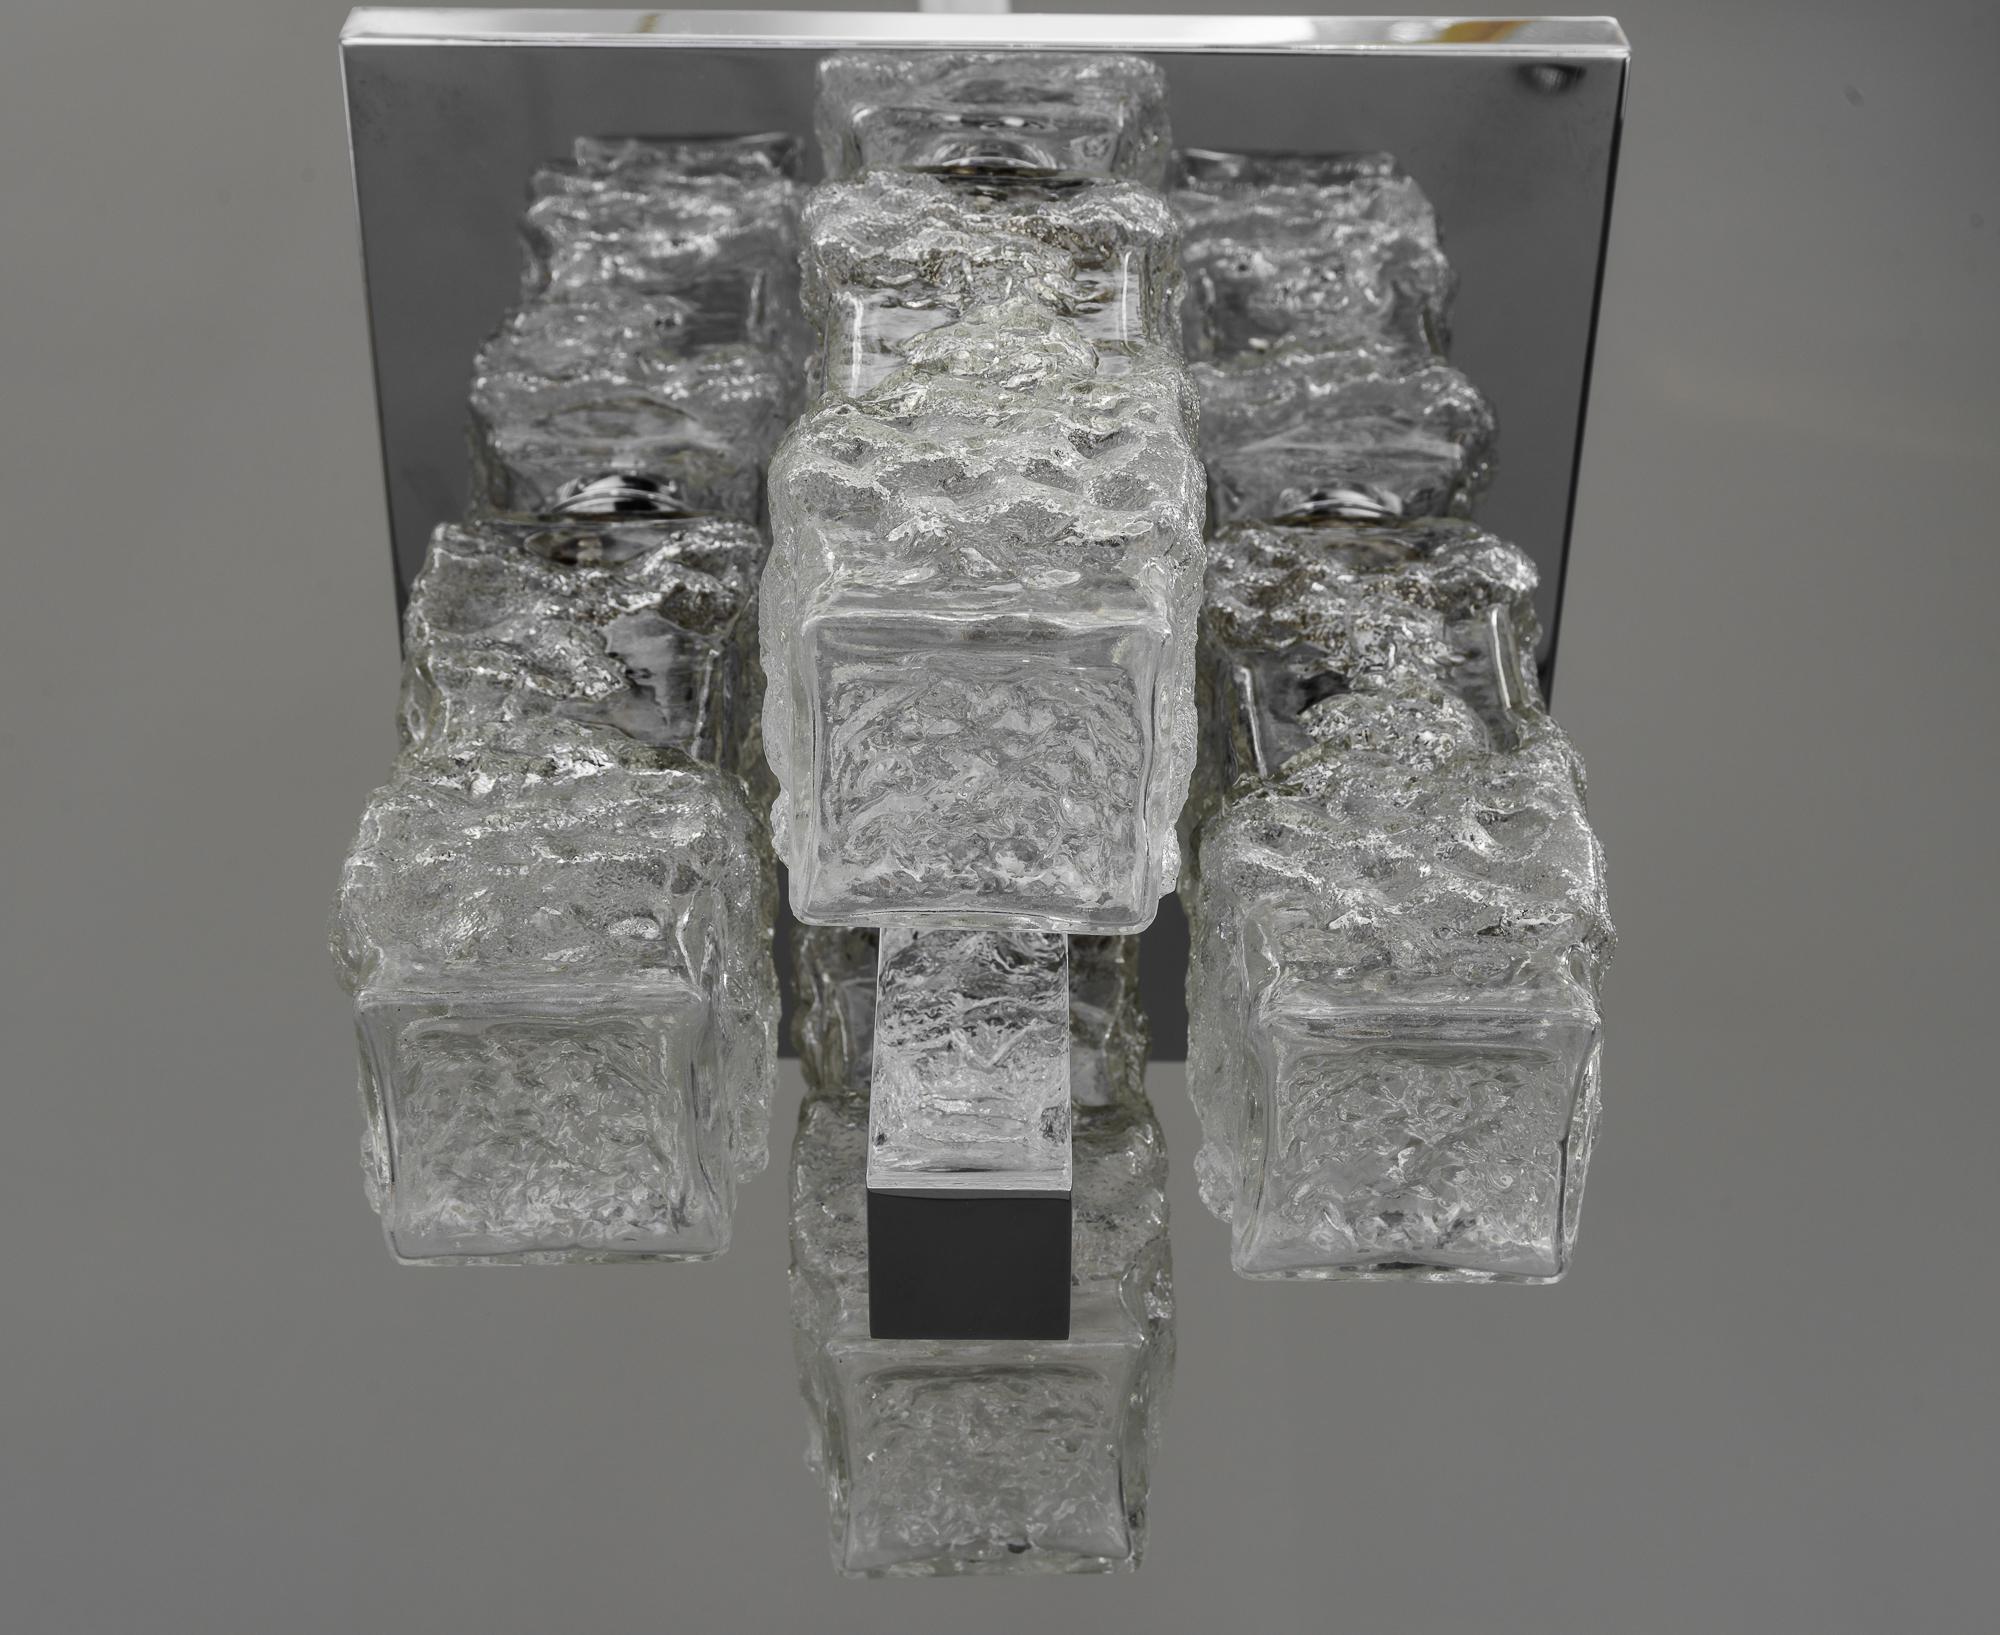 Petite Square Nickel-Plated Ice Glass Flush Mount by Hillebrand, Germany, 1970s For Sale 1